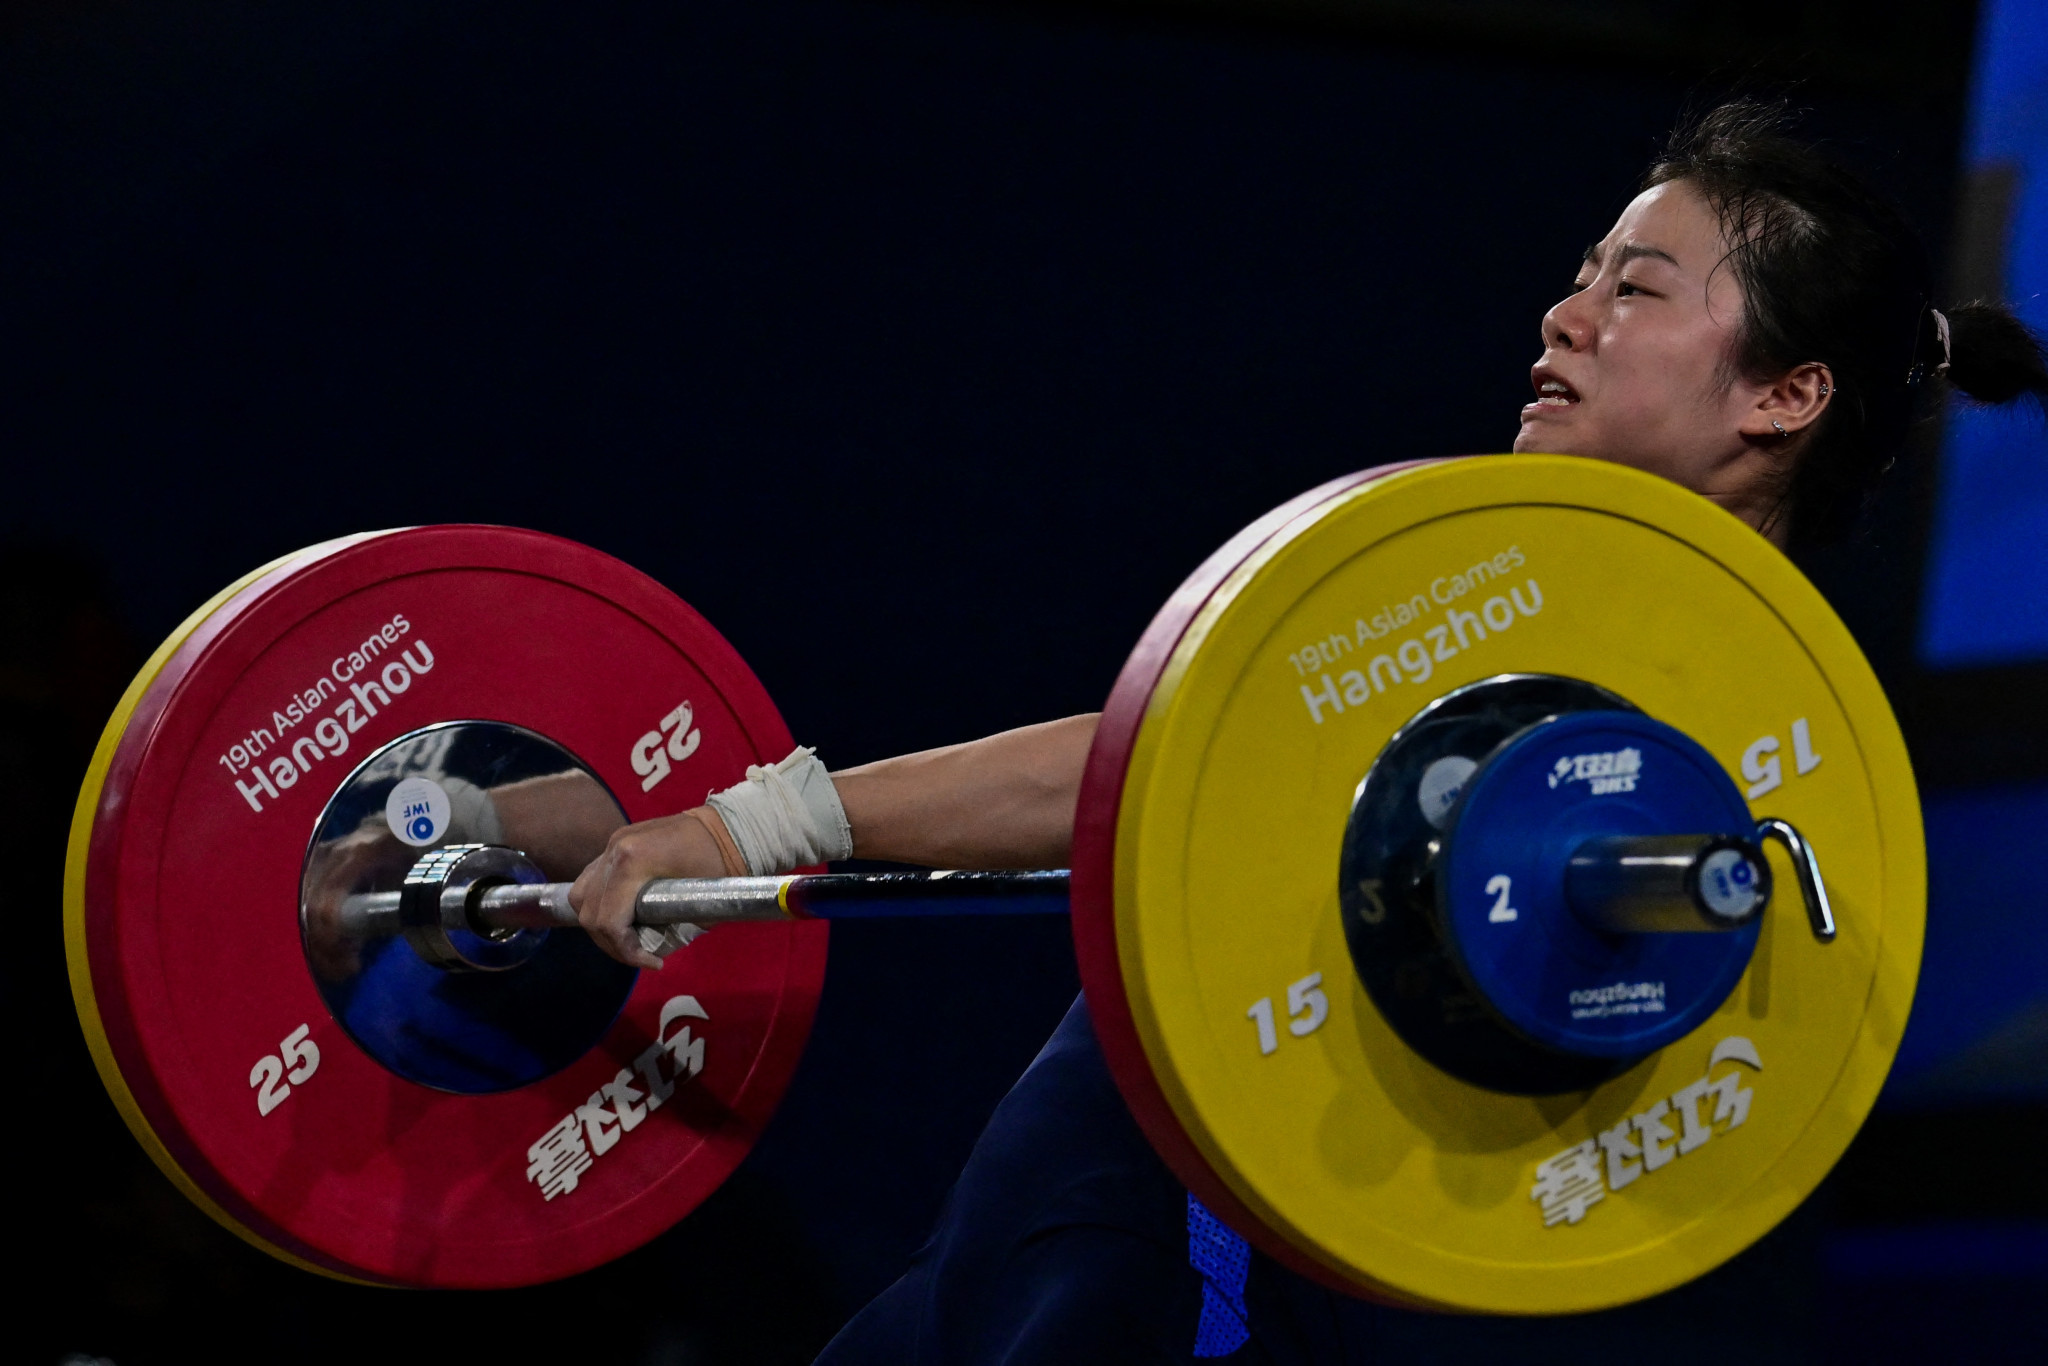 Pei Xinyi was one of two Chinese lifters to finish second to North Korean athletes at the Asian Games in Hangzhou ©Getty Images